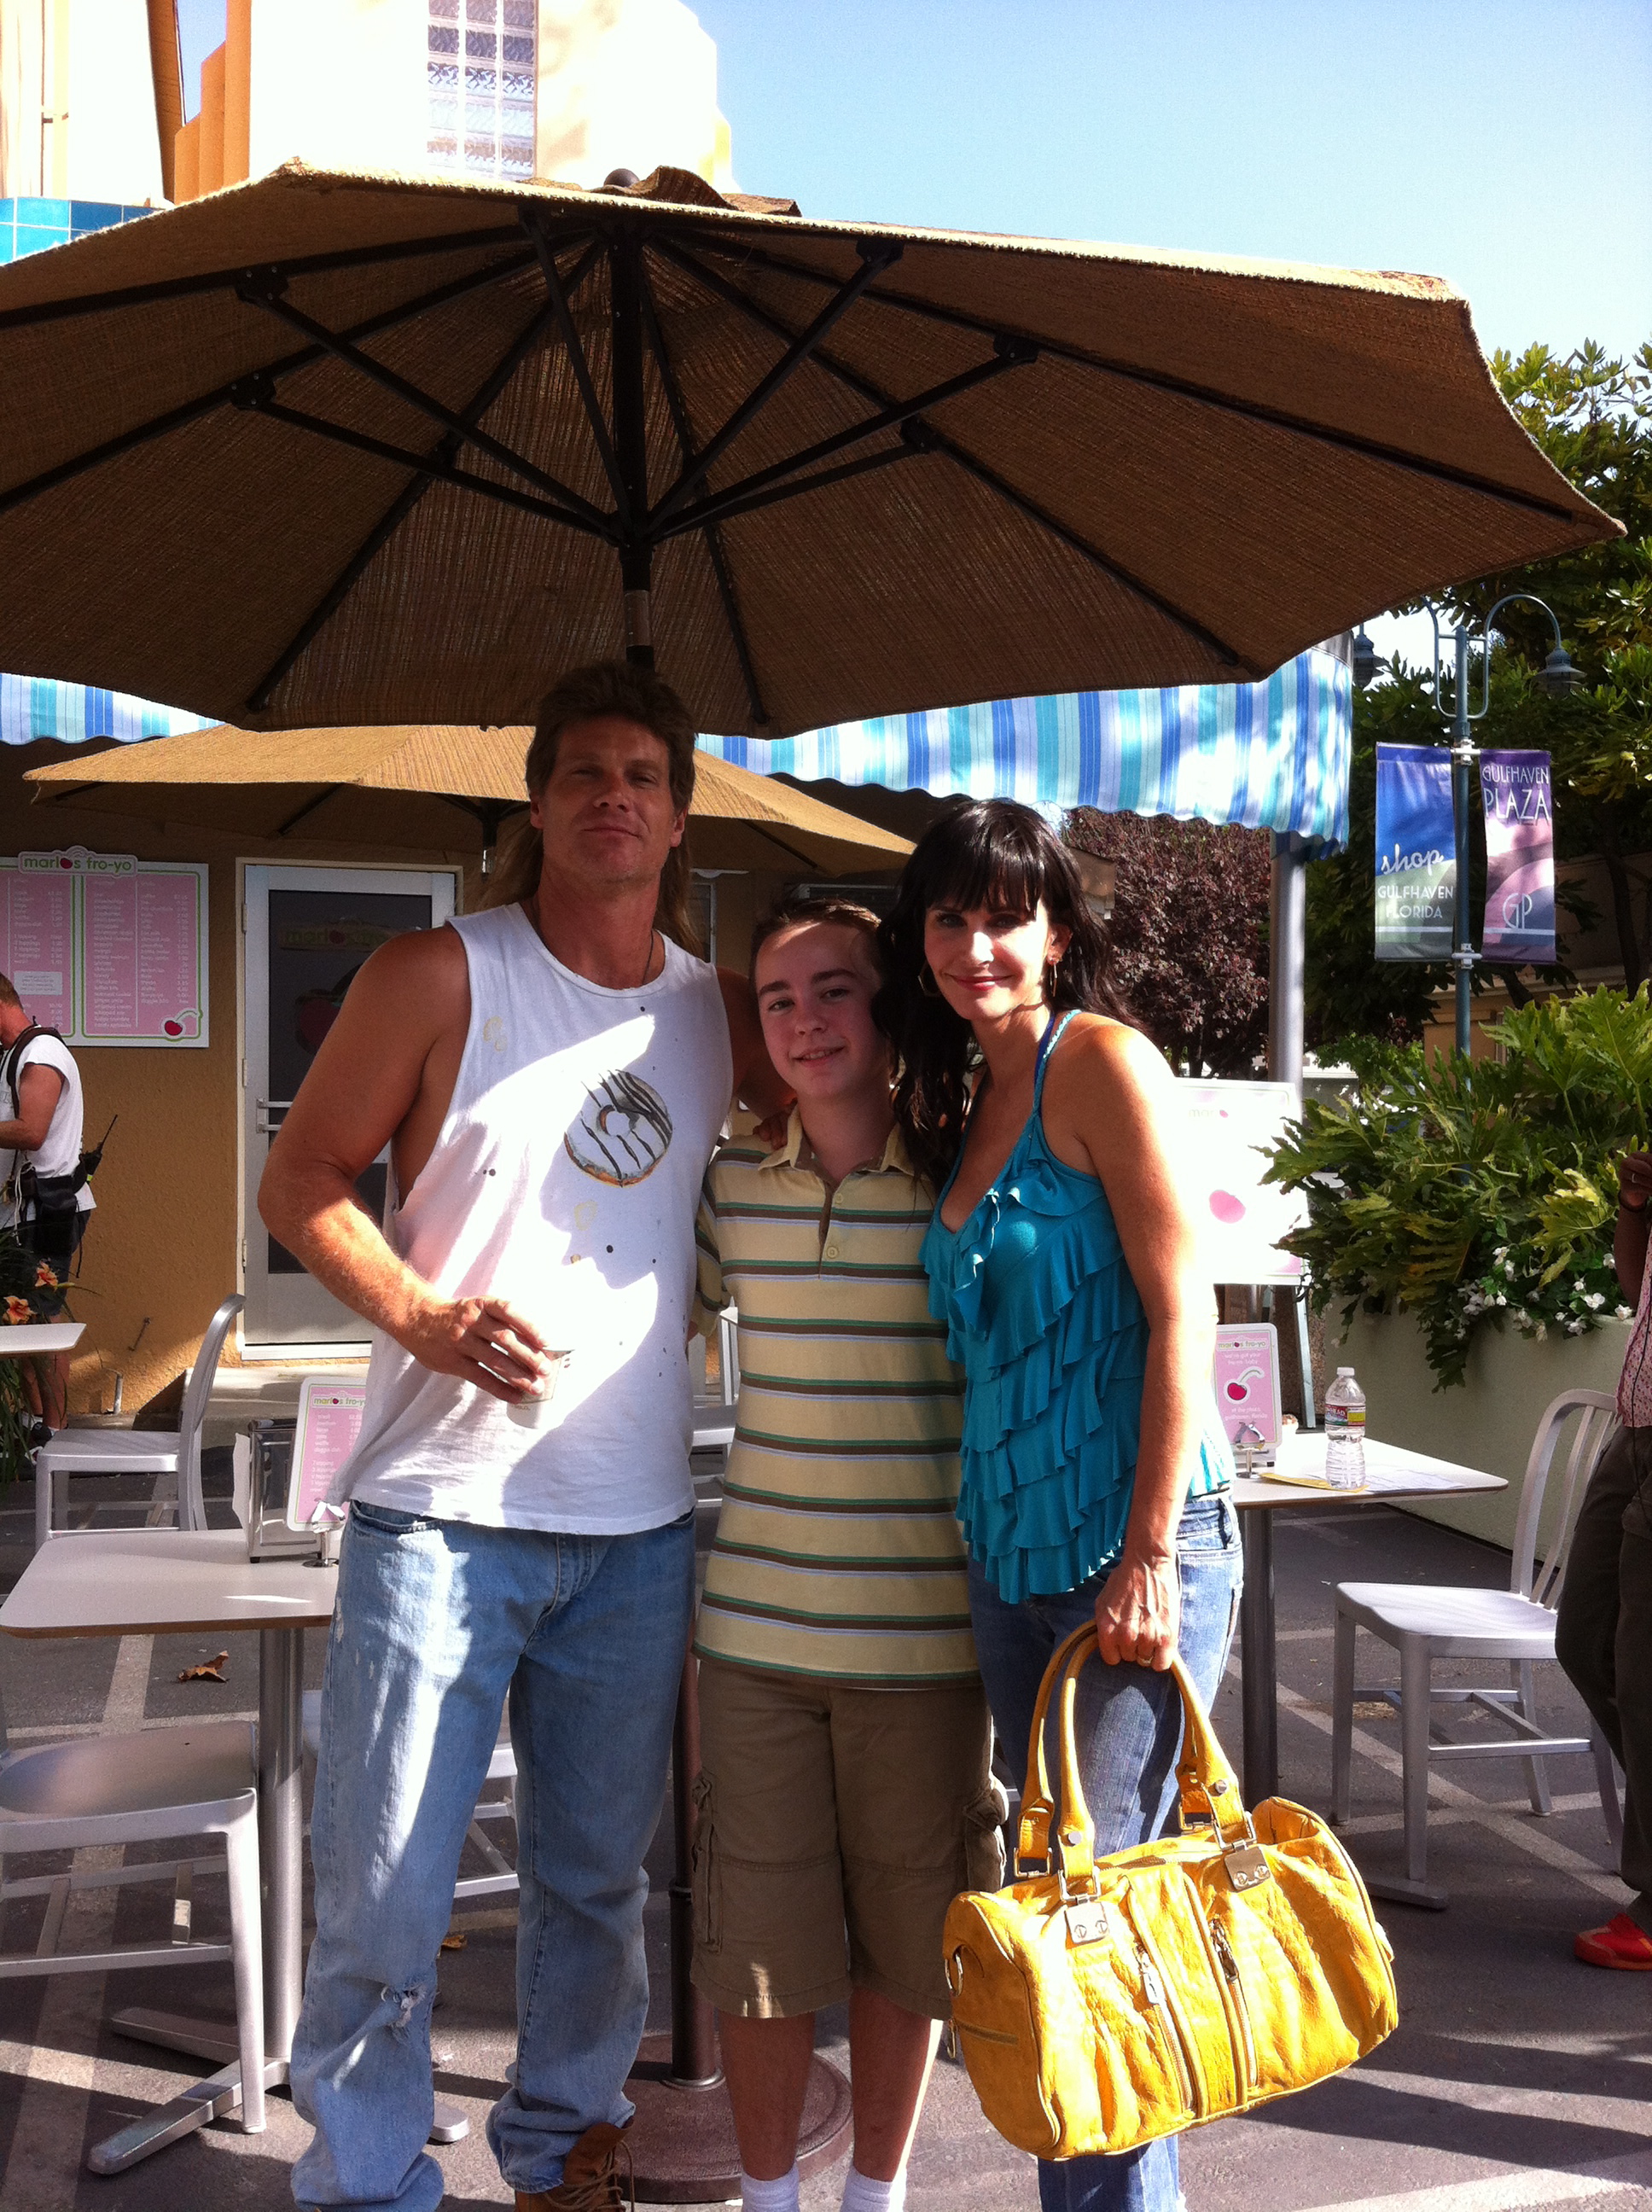 Chad Roberts on the set of Cougar Town with Courteney Cox and Brian Van Holt. Chad plays their son